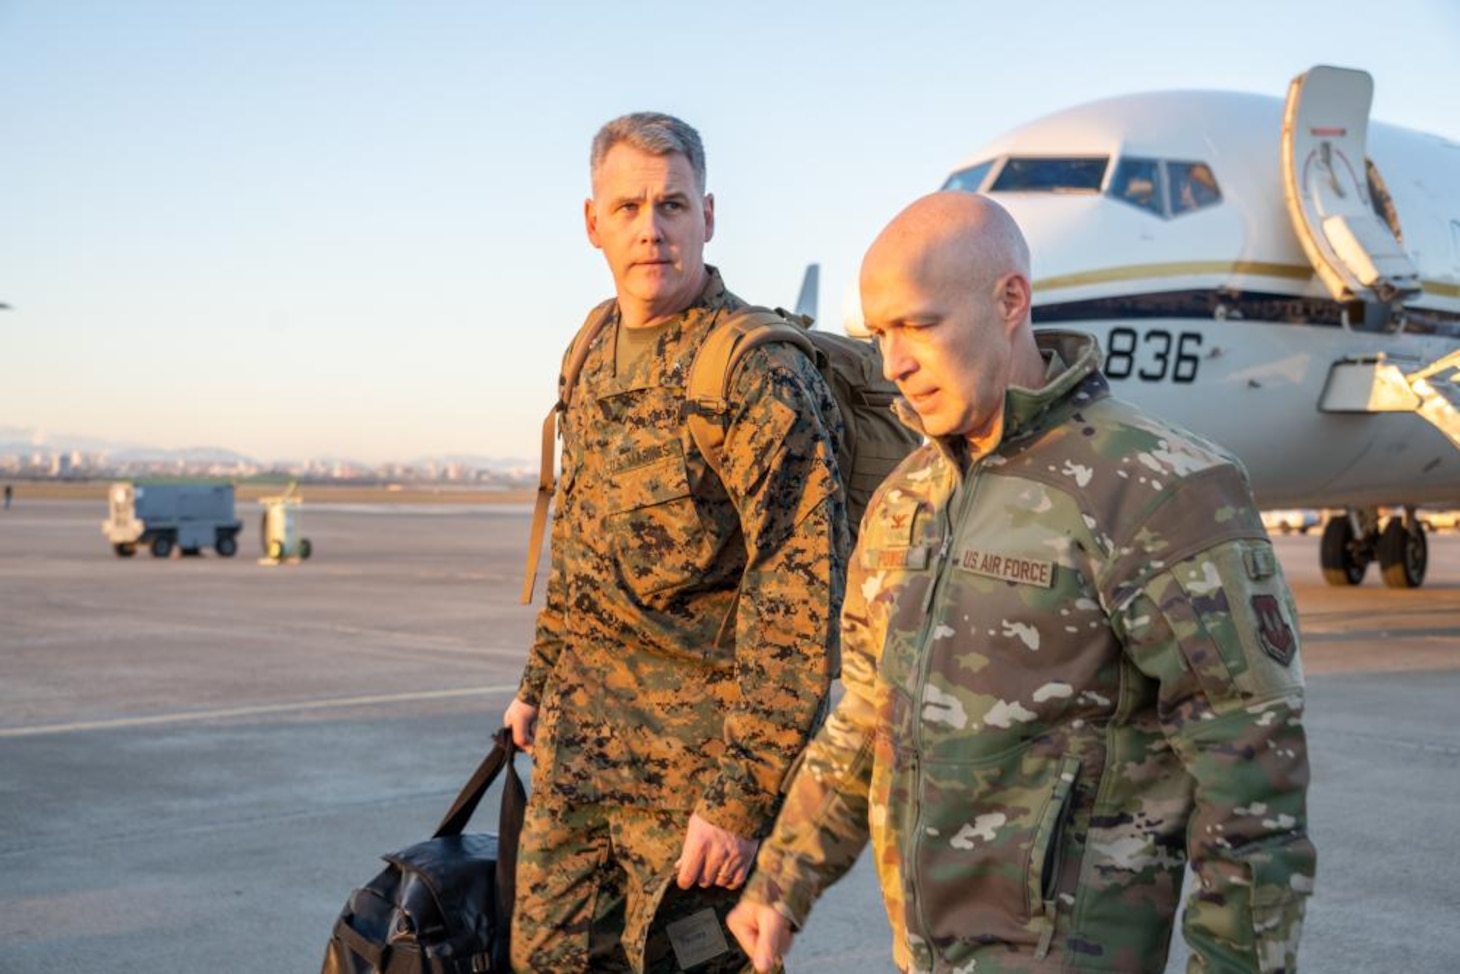 U.S. Marine Corps Brig. Gen. Andrew Priddy, commanding general of 2nd Marine Expeditionary Brigade and deputy commanding general of II Marine Expeditionary Force, left, walks with Col. Calvin Powell, 39th Air Base Wing commander, right, after arriving at Incirlik Air Base, Türkiye, Feb 9, 2023. The U.S. Marines and U.S. Navy personnel were tasked to assist with leading the response force following a series of earthquakes that struck central-southern Türkiye on Feb 6, 2023. As a fellow NATO ally, the U.S. Government mobilized personnel to assist in Türkiye in their response efforts.